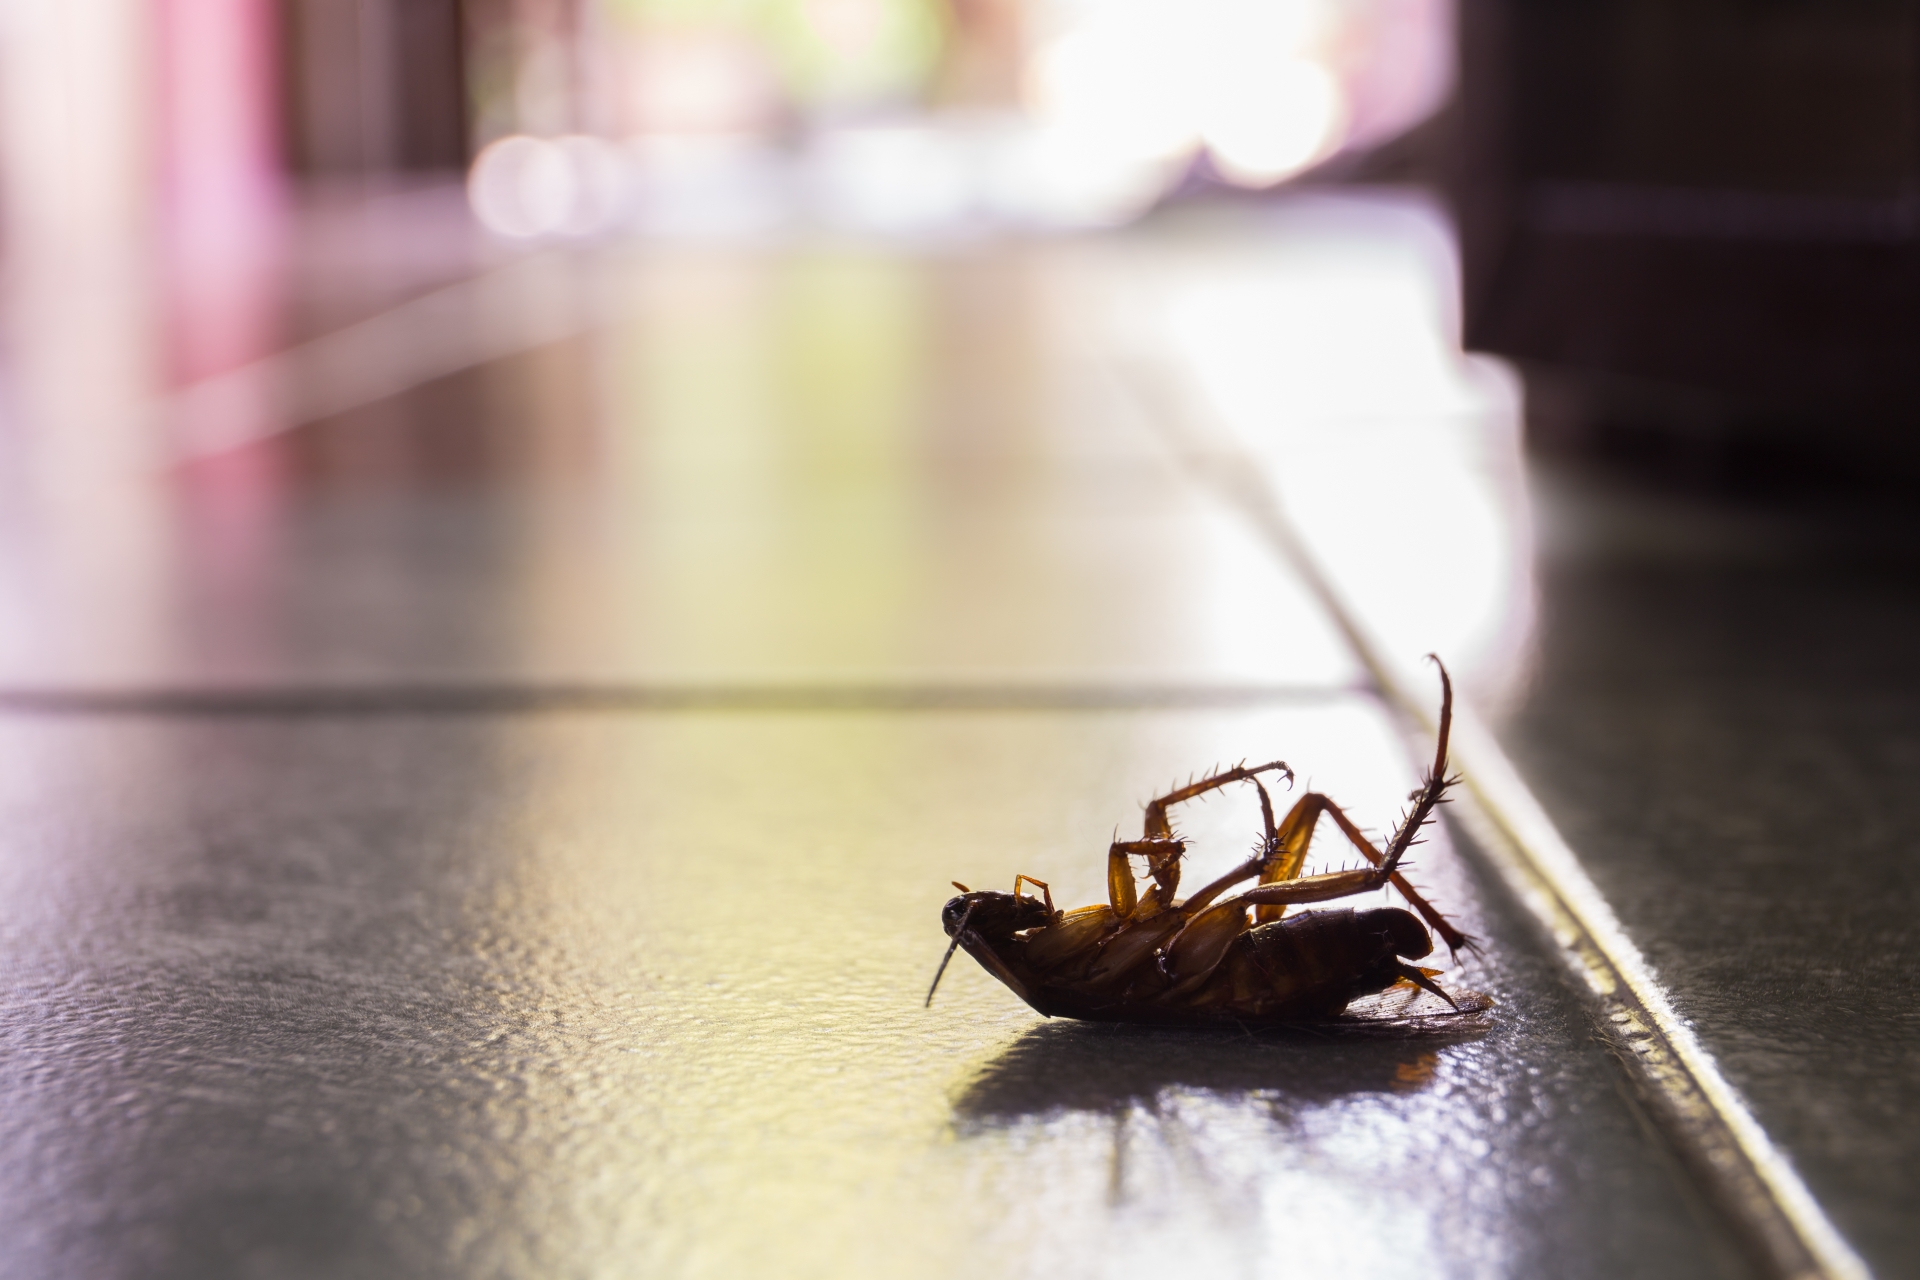 Cockroach Control, Pest Control in Potters Bar, Cuffley, Northaw, EN6. Call Now 020 8166 9746